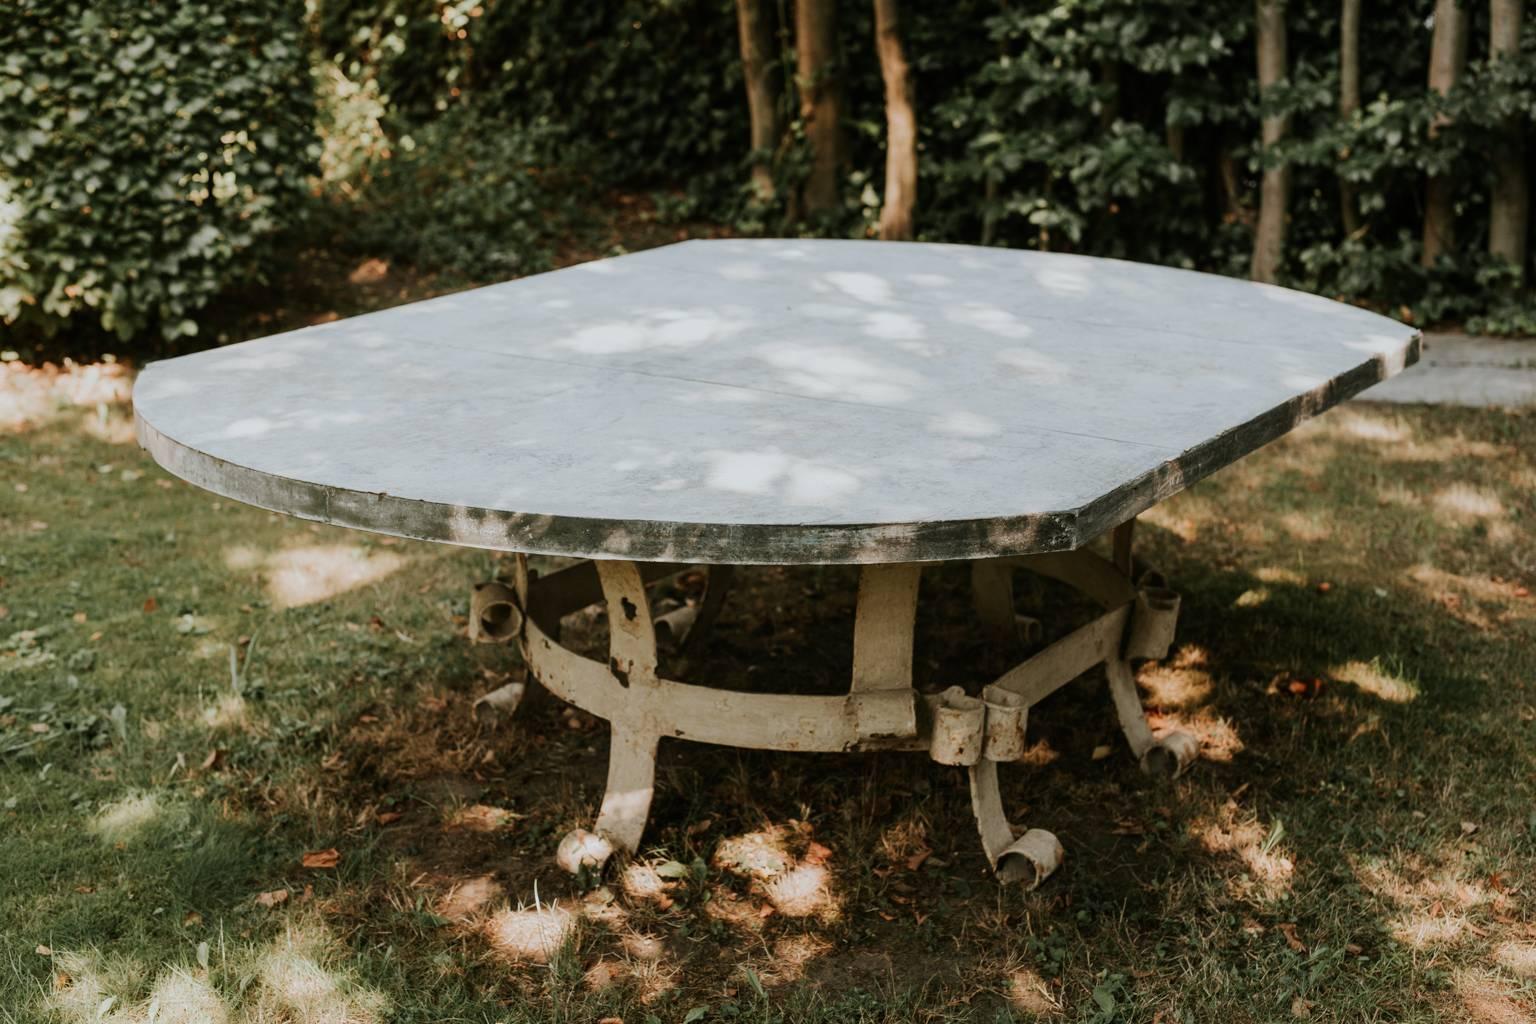 Wonderful patina on this lead tabletop, beautiful indoors as well as outdoors, sublime grey color, large dimensions.